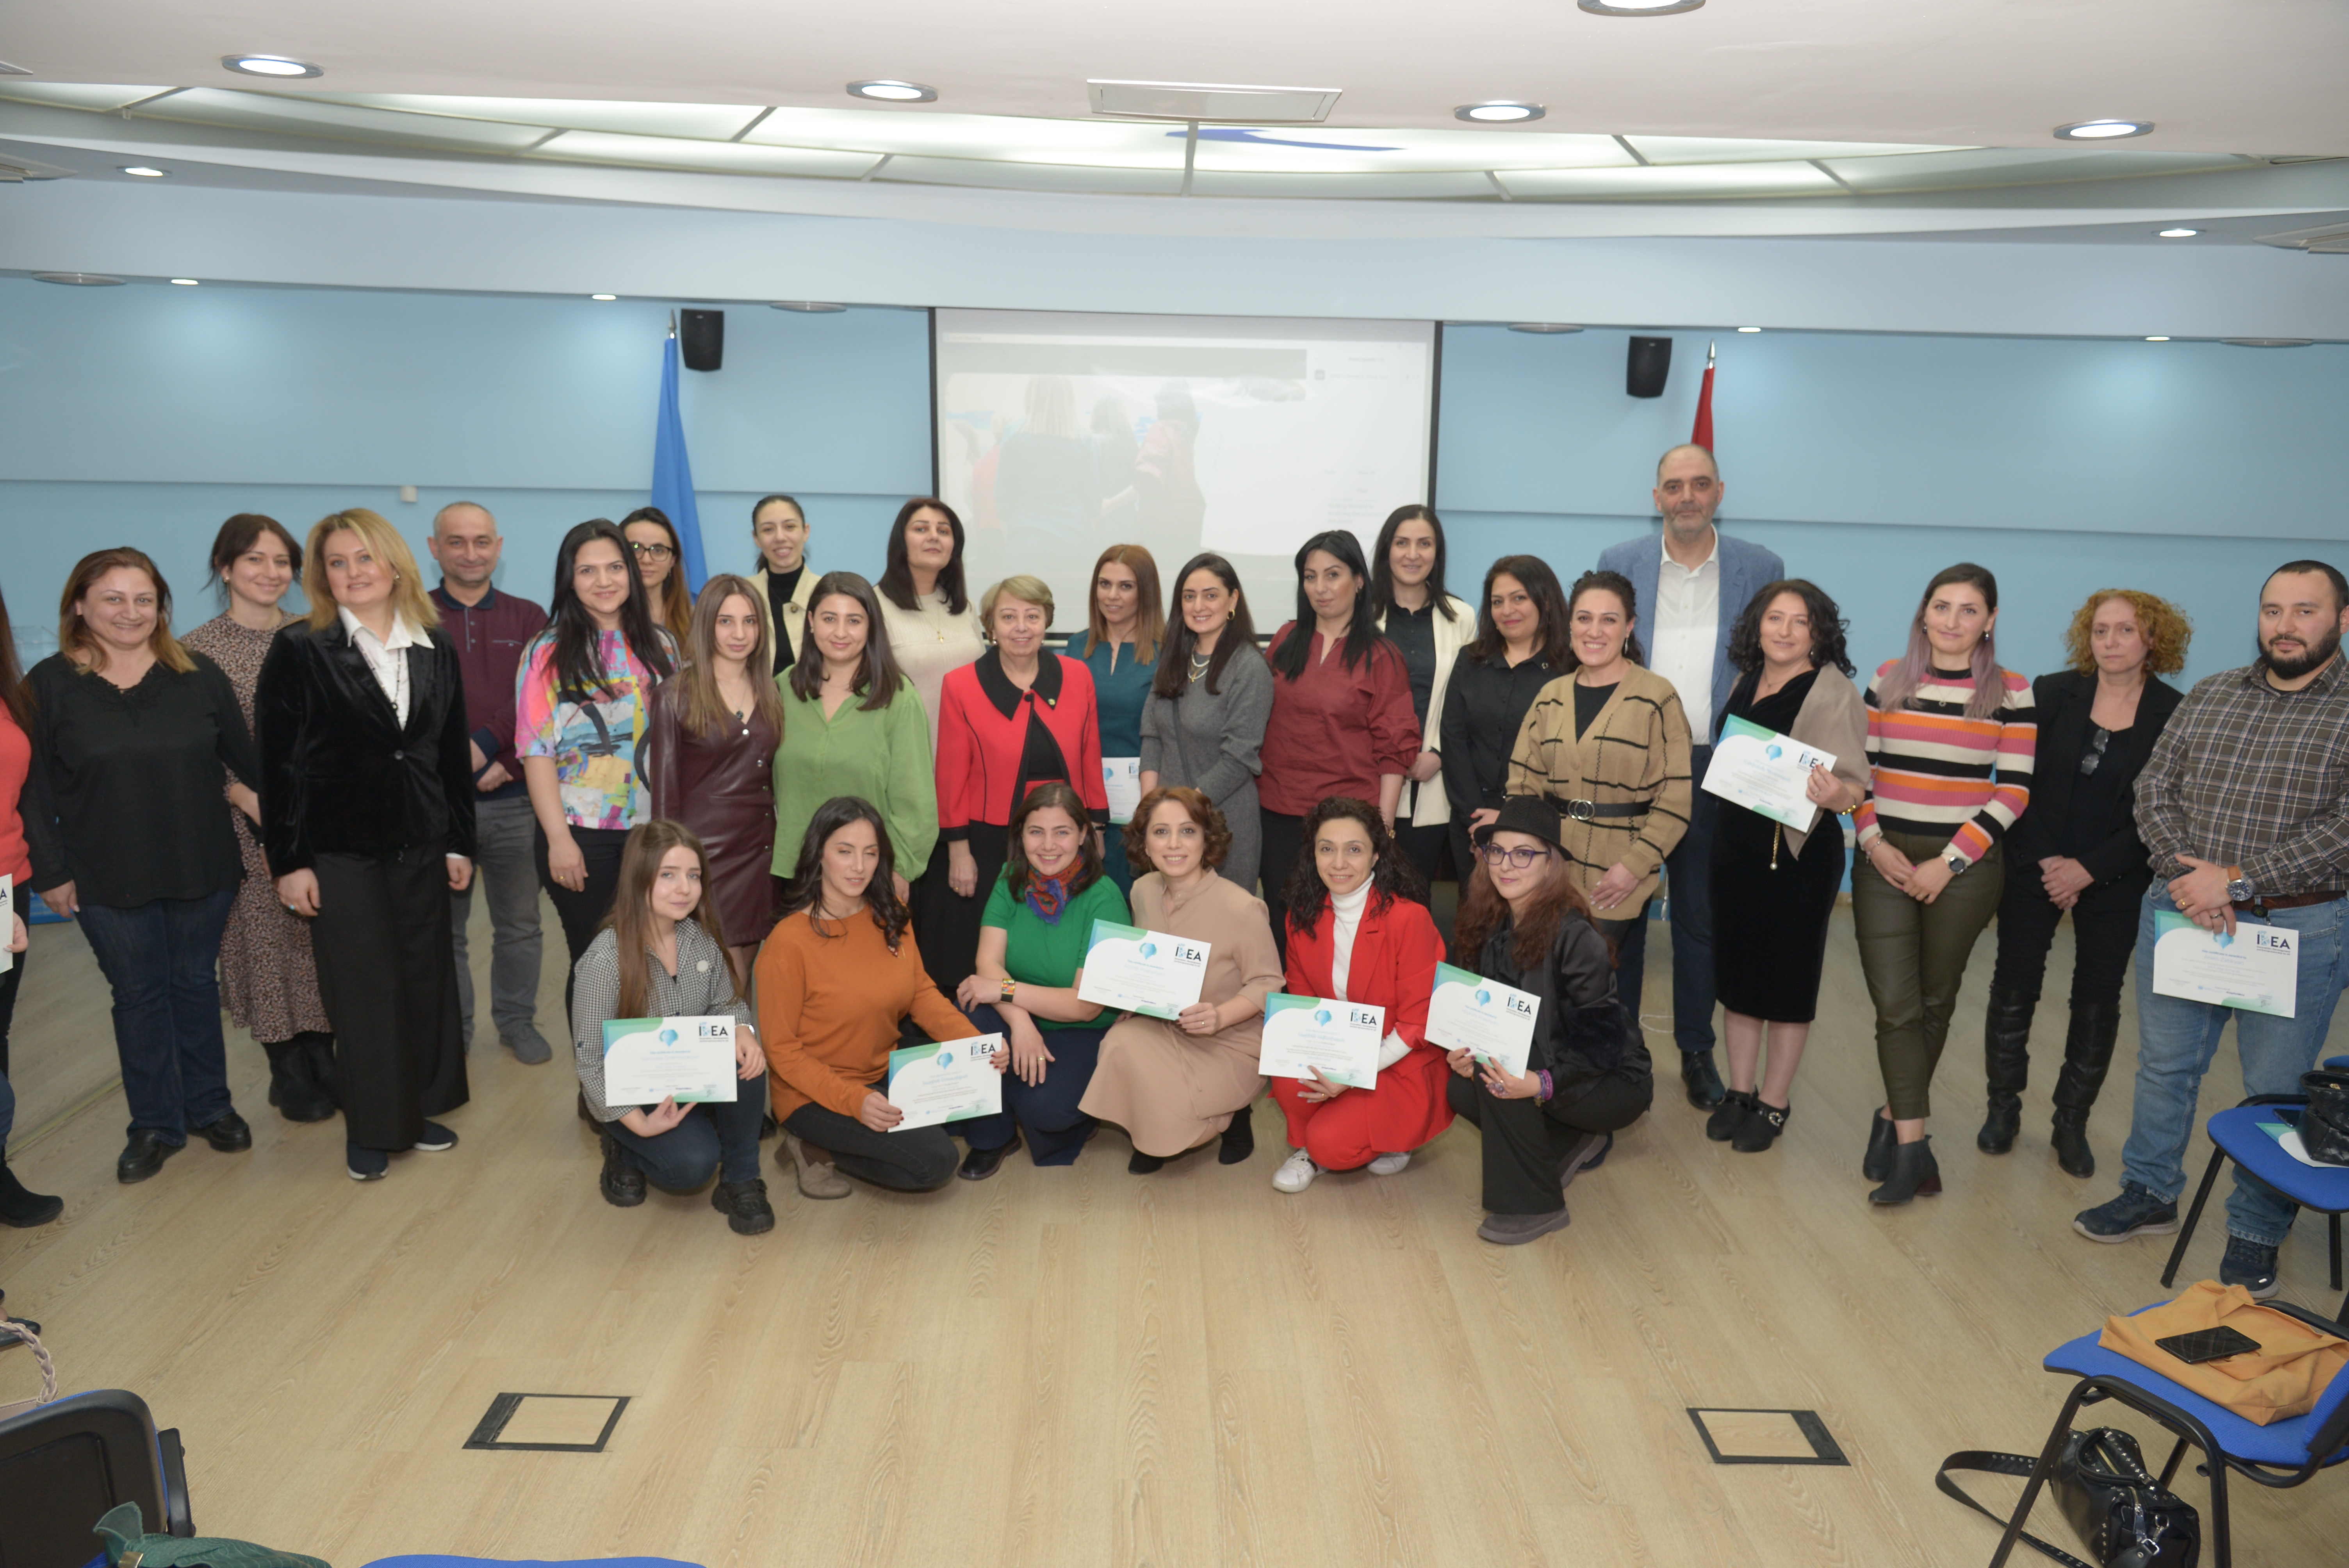 The participants of the IDEA App Armenia program received certificates at the closing ceremony. 